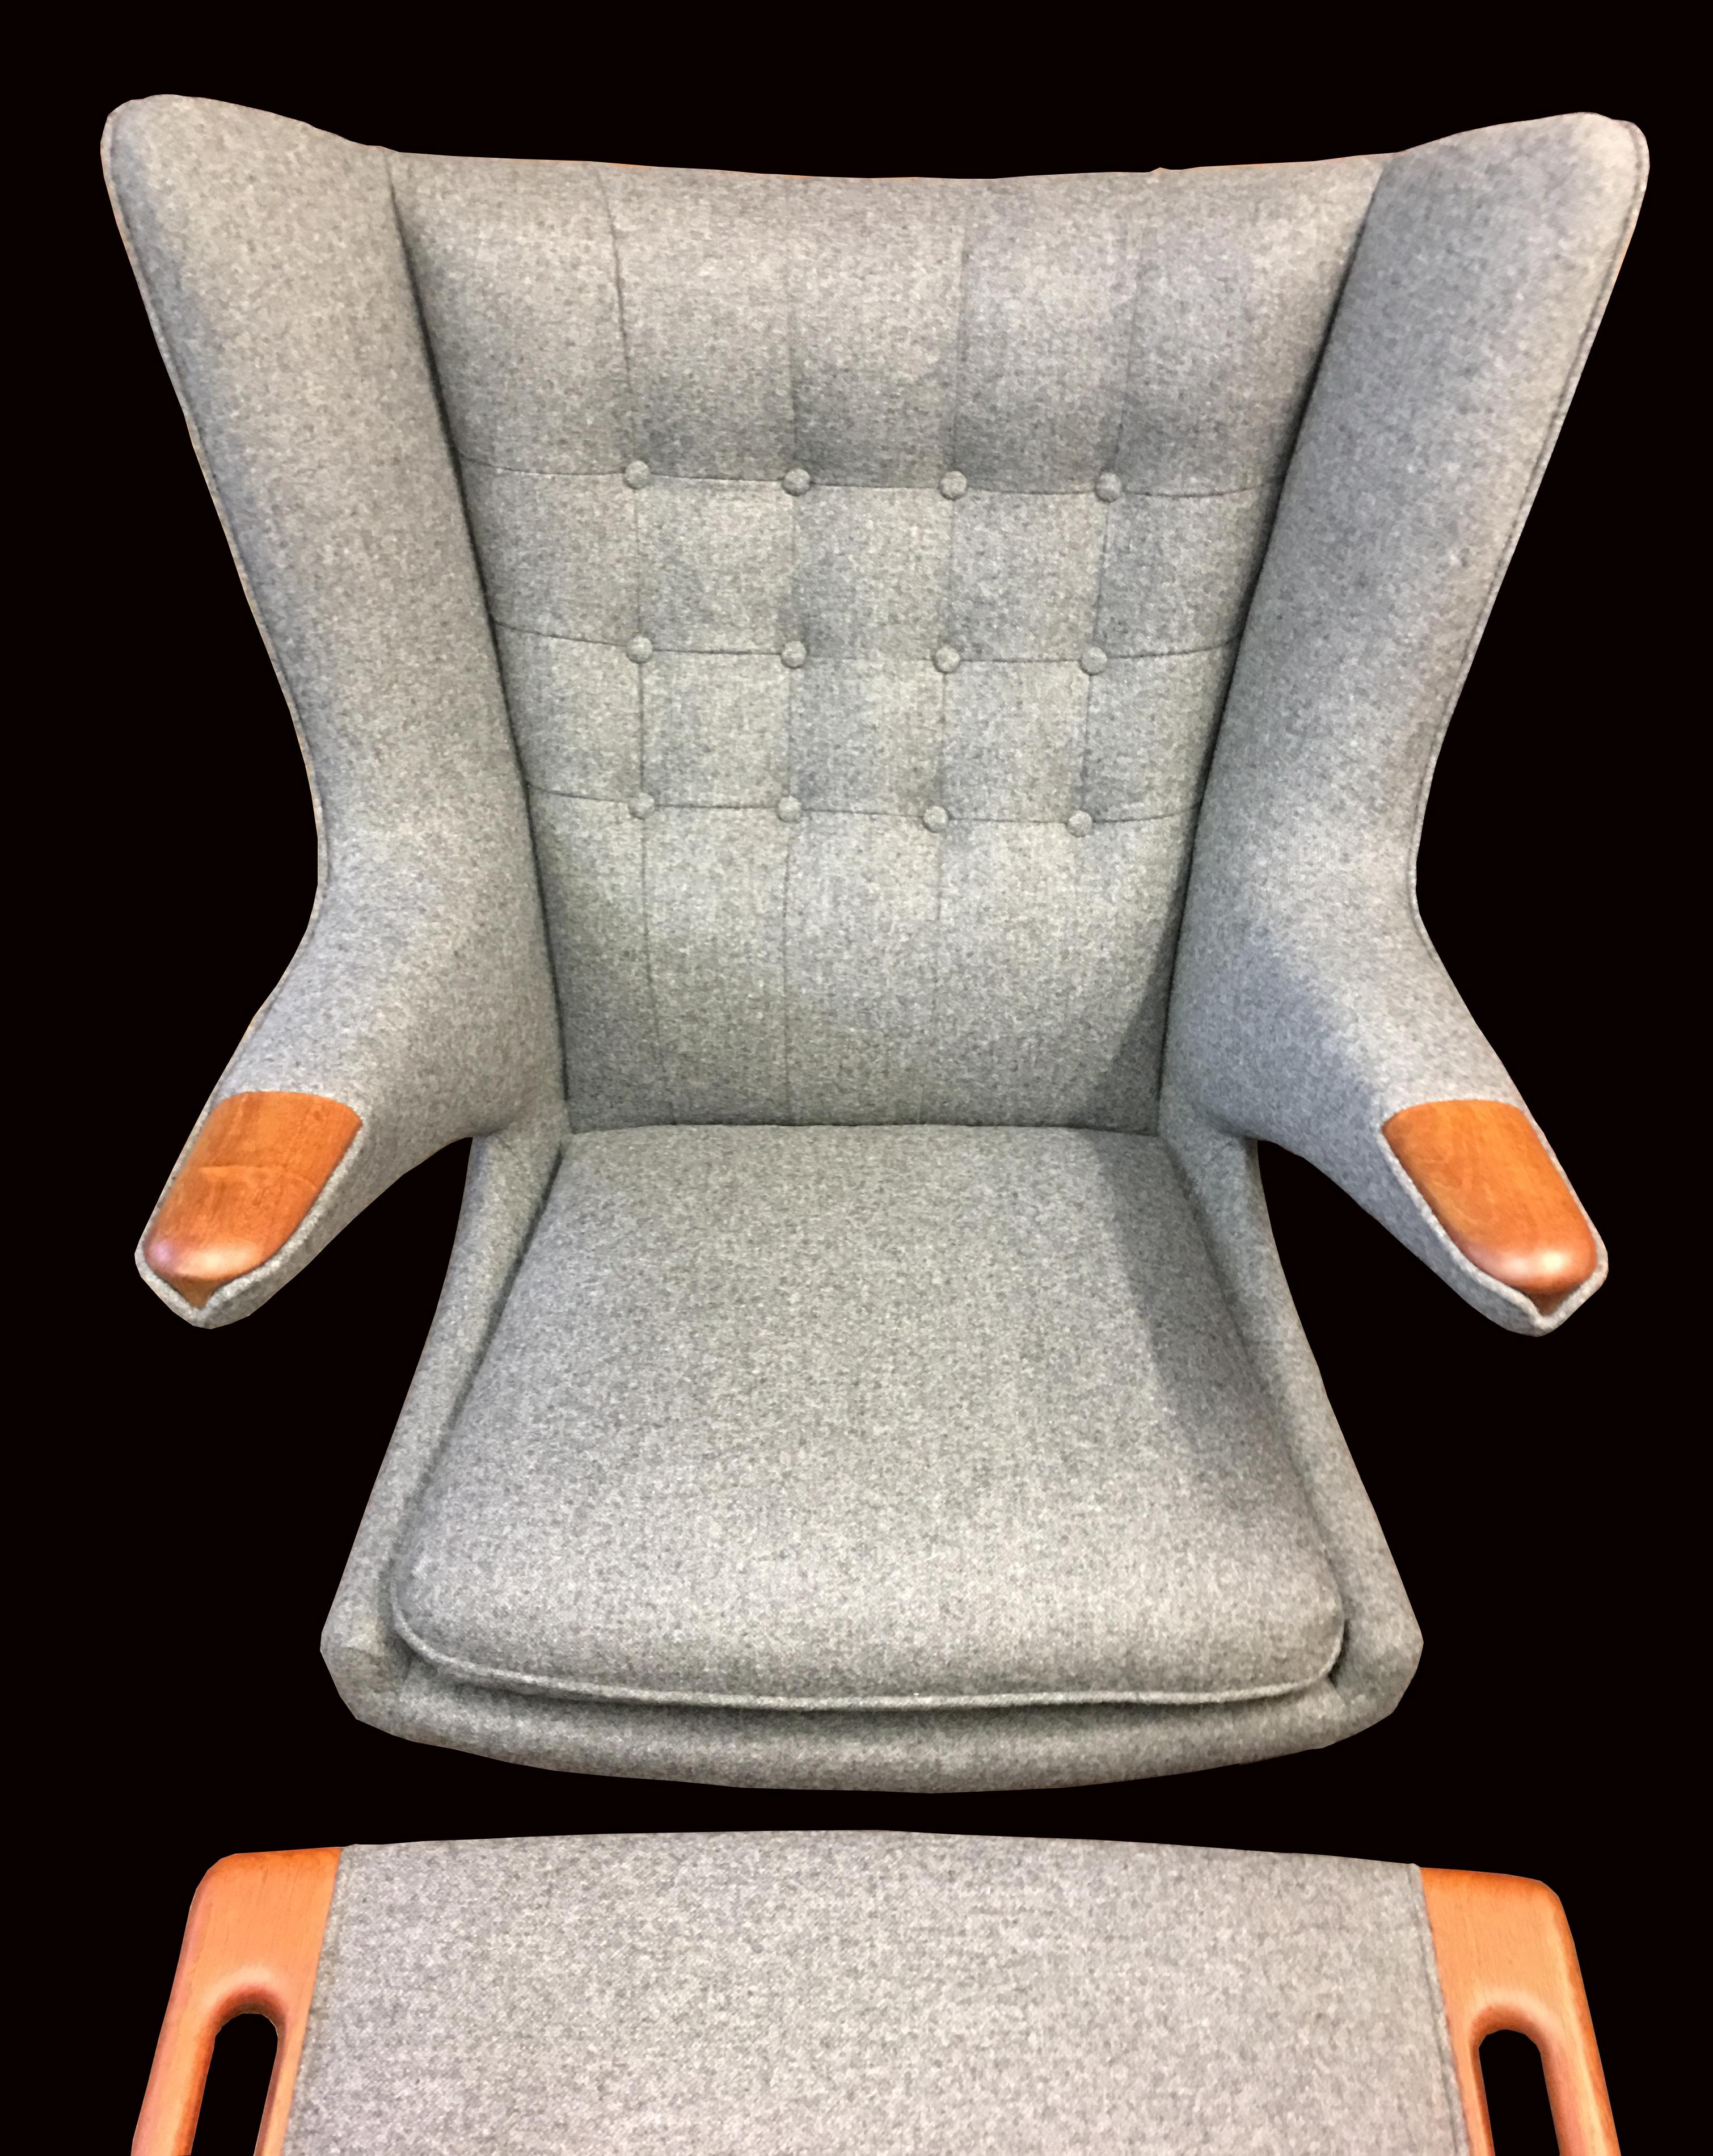 This is a particularly nice original example, produced some time in the 1960s, it has nicely patinated Teak legs and 'Paws' all in very good condition, we have had it completely reupholstered in high quality grey 100% wool fabric that complies to